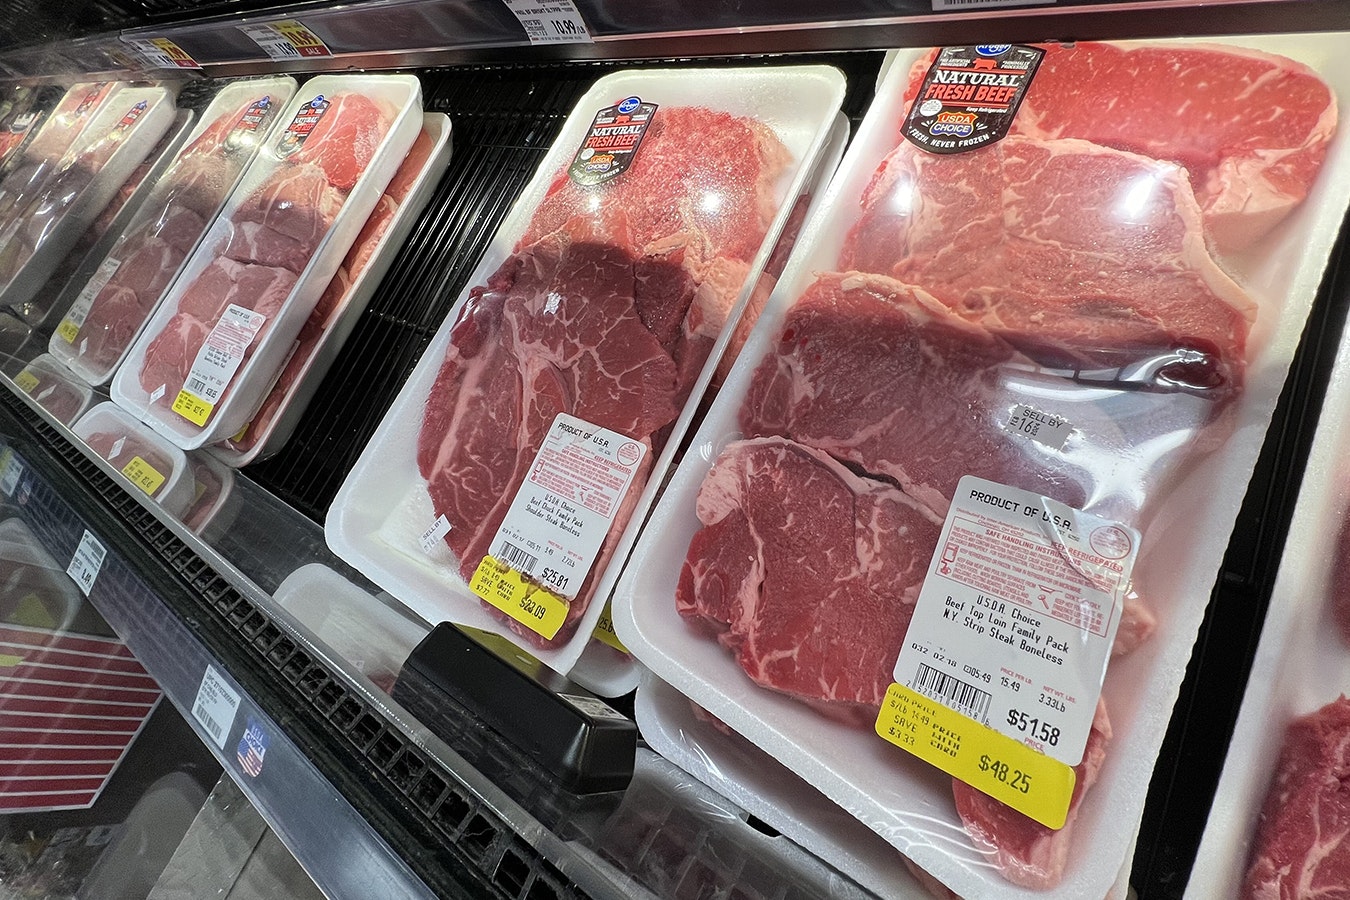 Beef prices have been continuing to climb as ranchers don't have enough supply for demand, like these prices at King Soopers in Cheyenne.